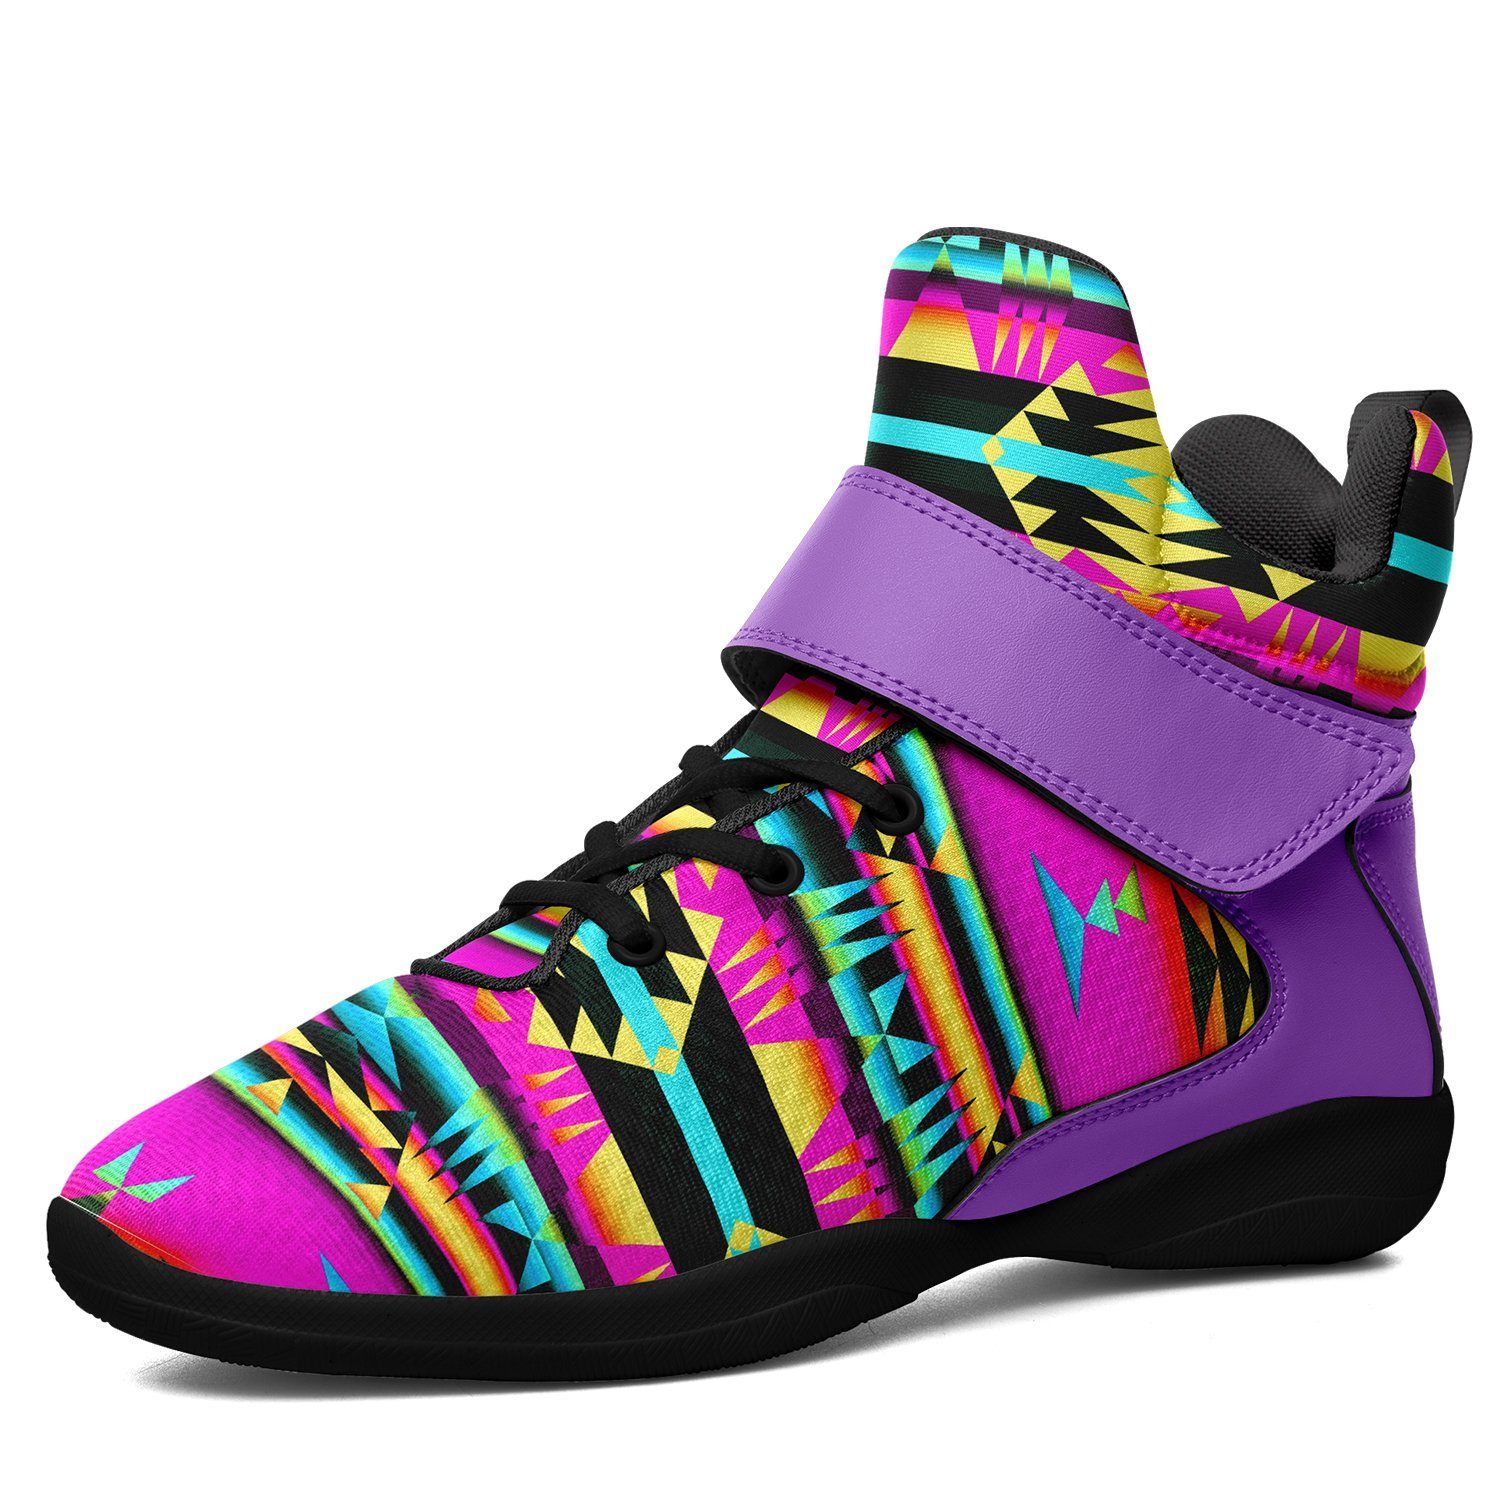 Between the Sunset Mountains Kid's Ipottaa Basketball / Sport High Top Shoes 49 Dzine US Child 12.5 / EUR 30 Black Sole with Lavender Strap 